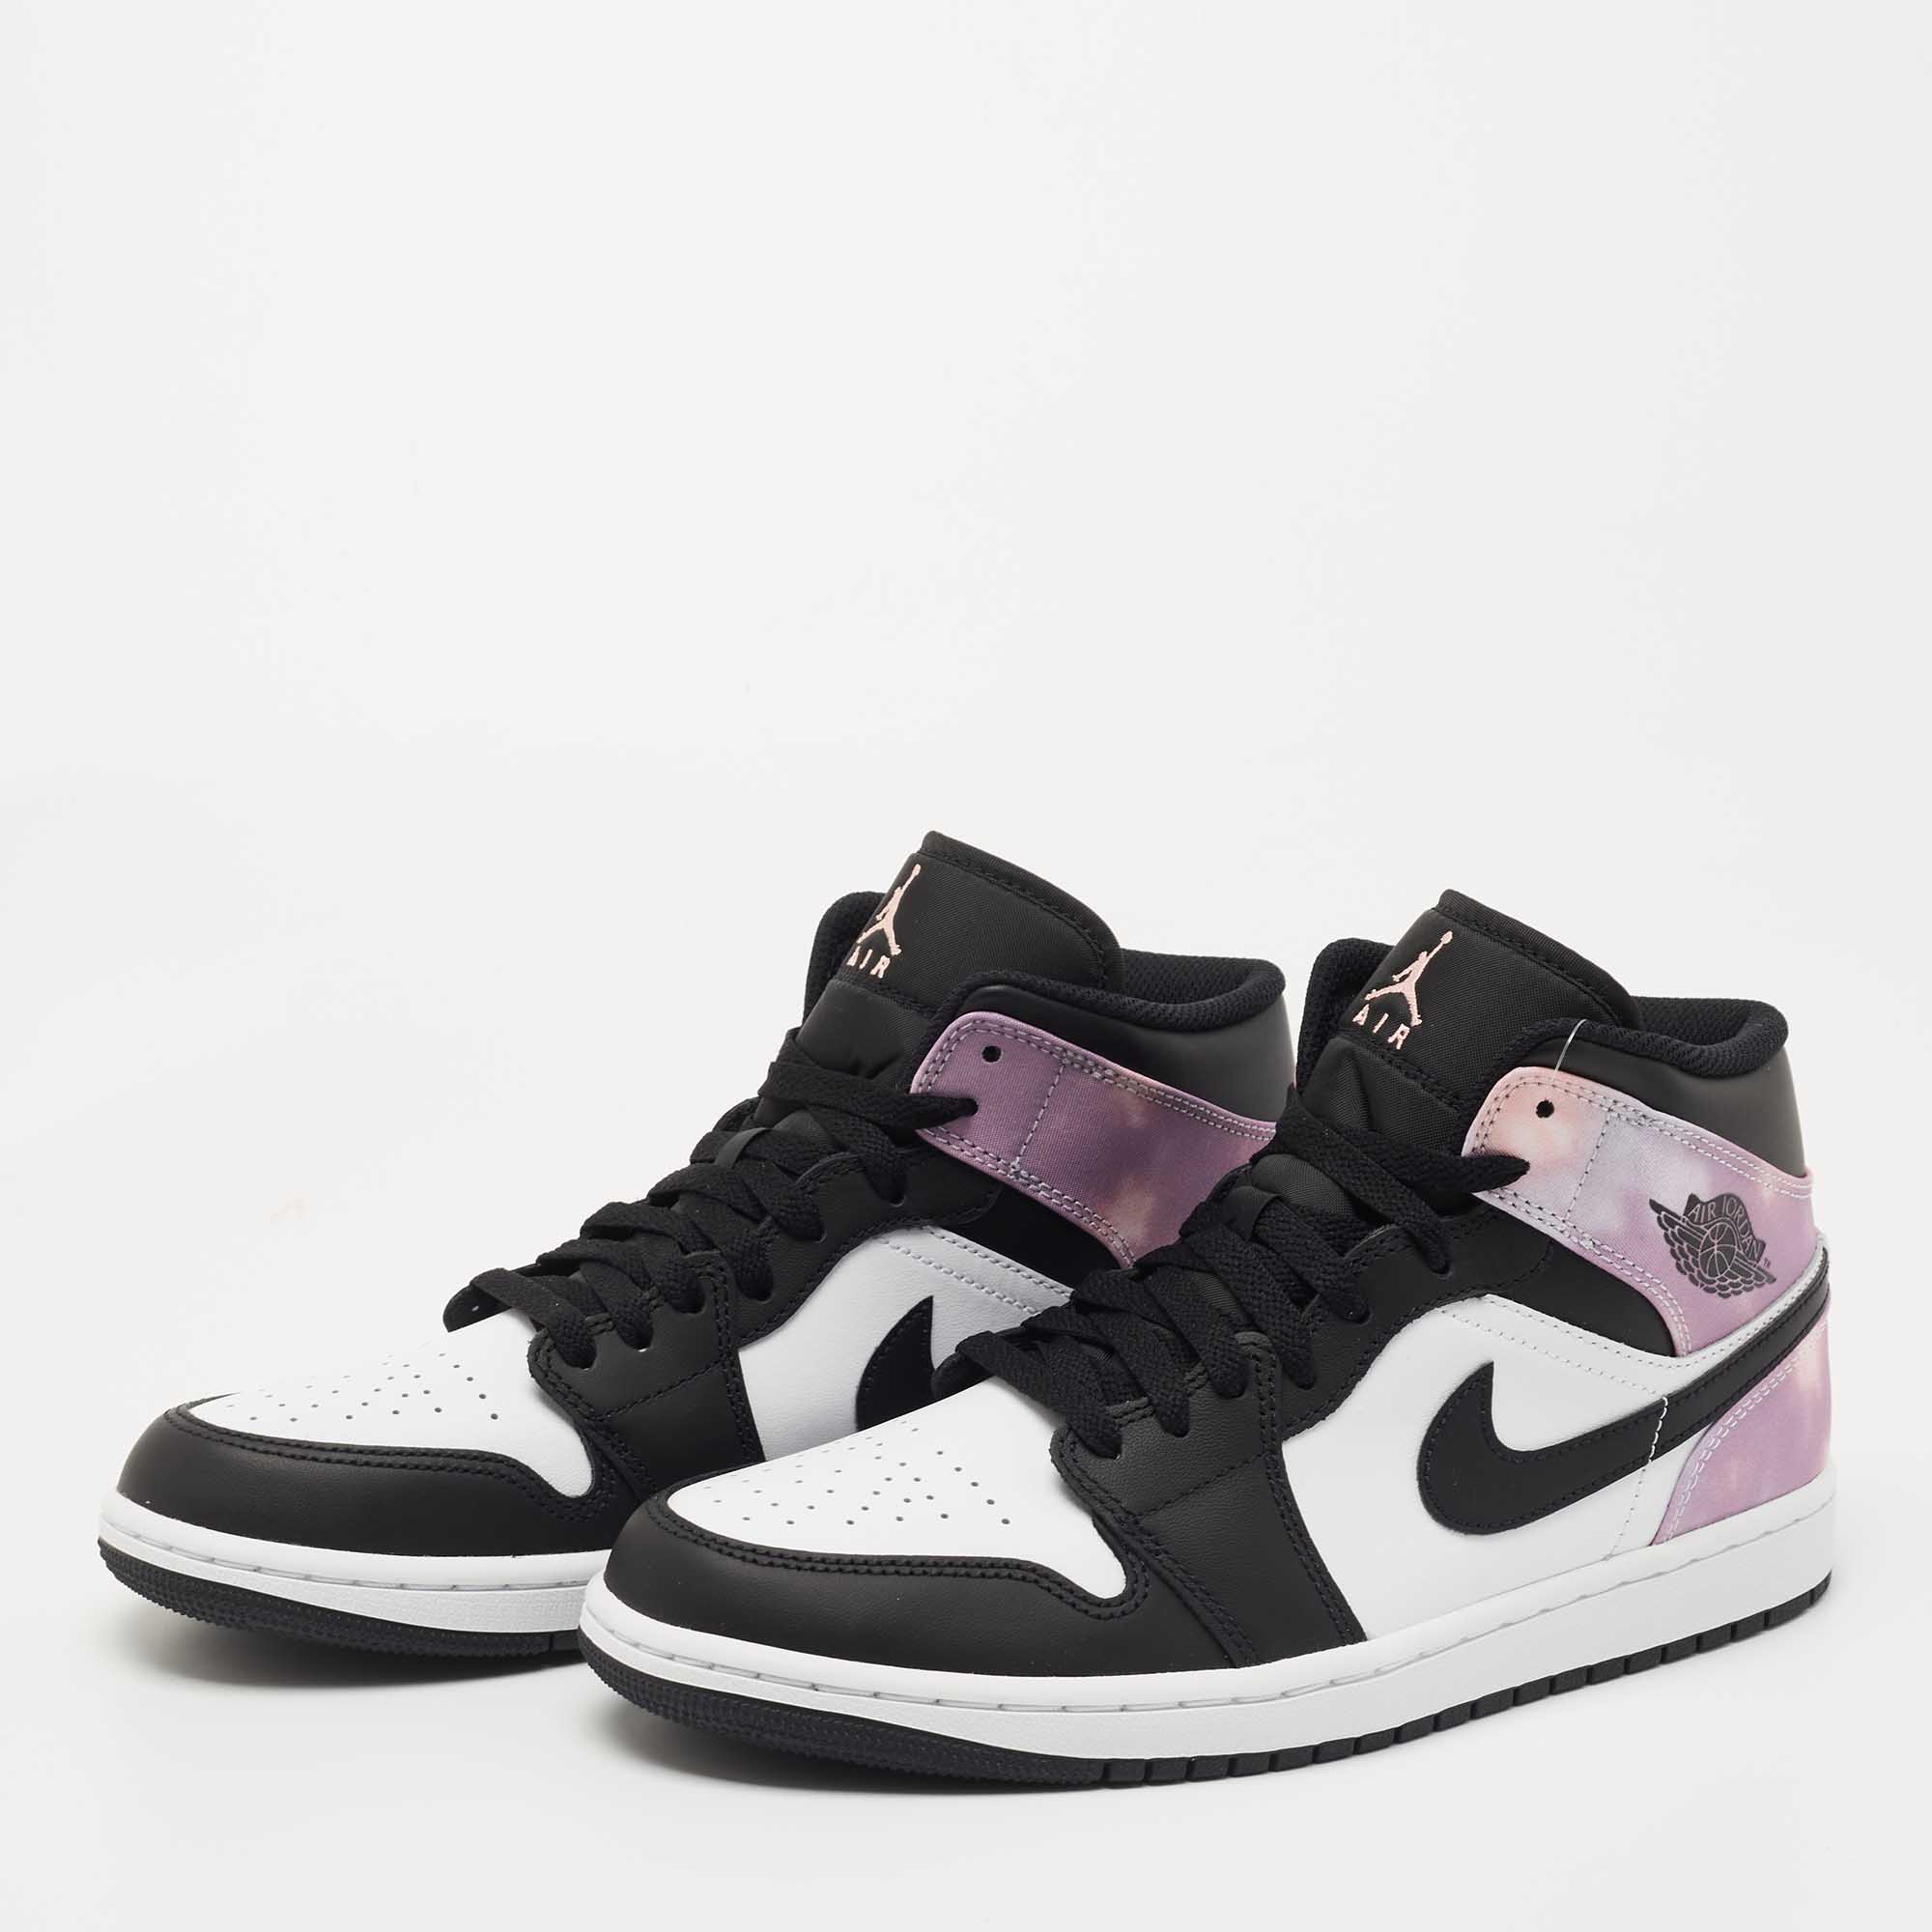 

Air Jordan 1 Tricolor Leather and Tie Dye Fabric Mid SE Zen Master Sneakers Size, Purple